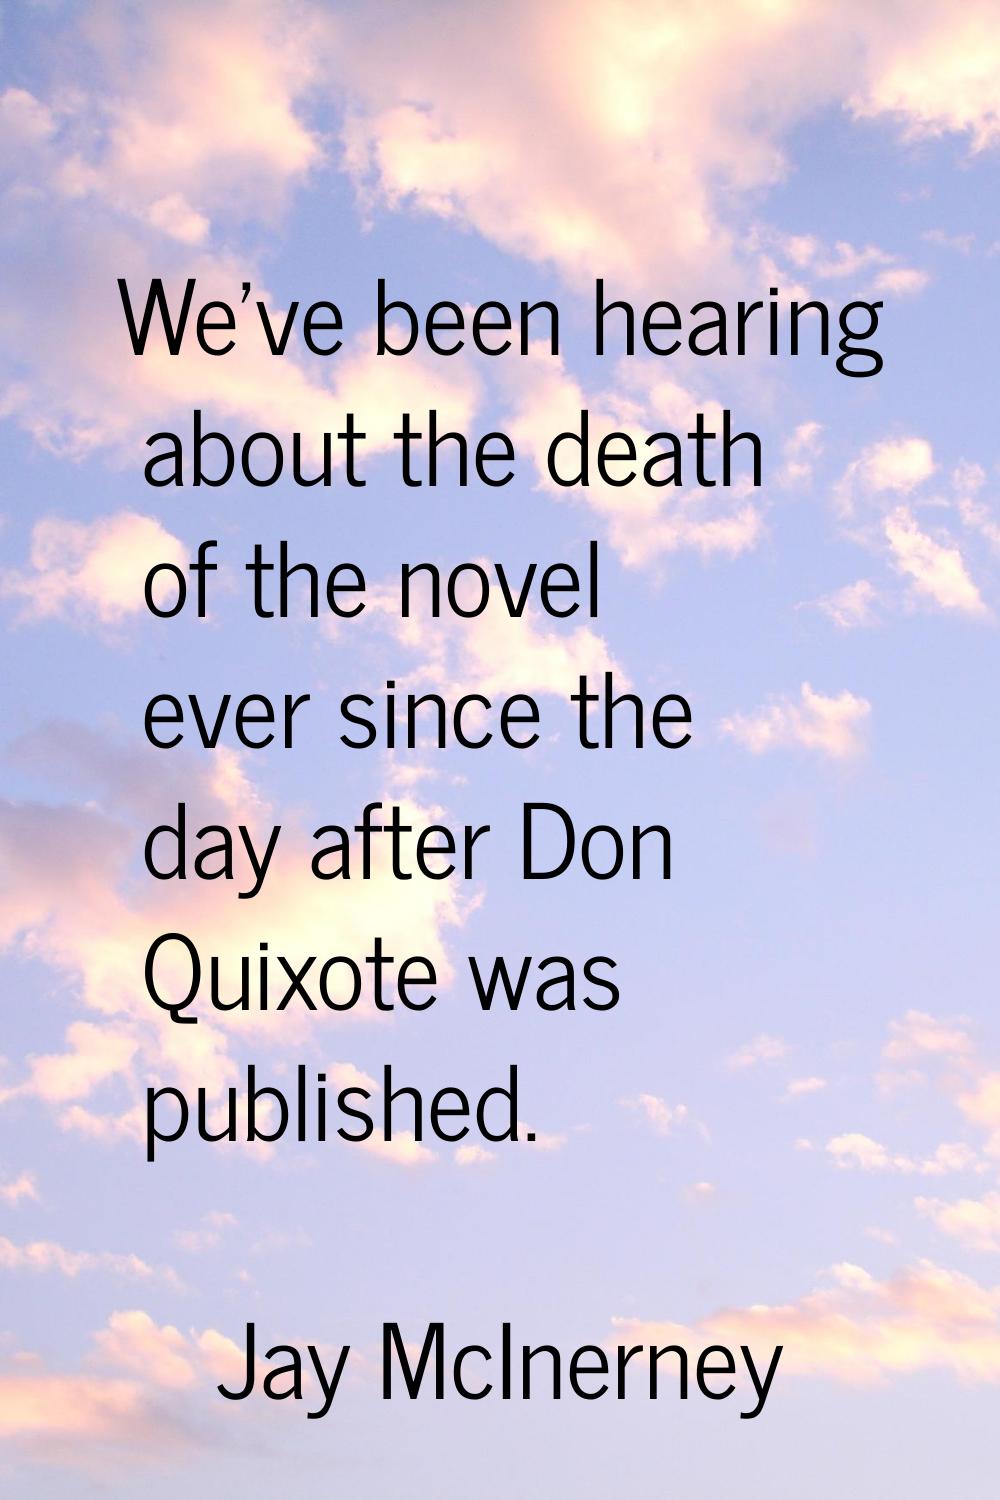 We've been hearing about the death of the novel ever since the day after Don Quixote was published.